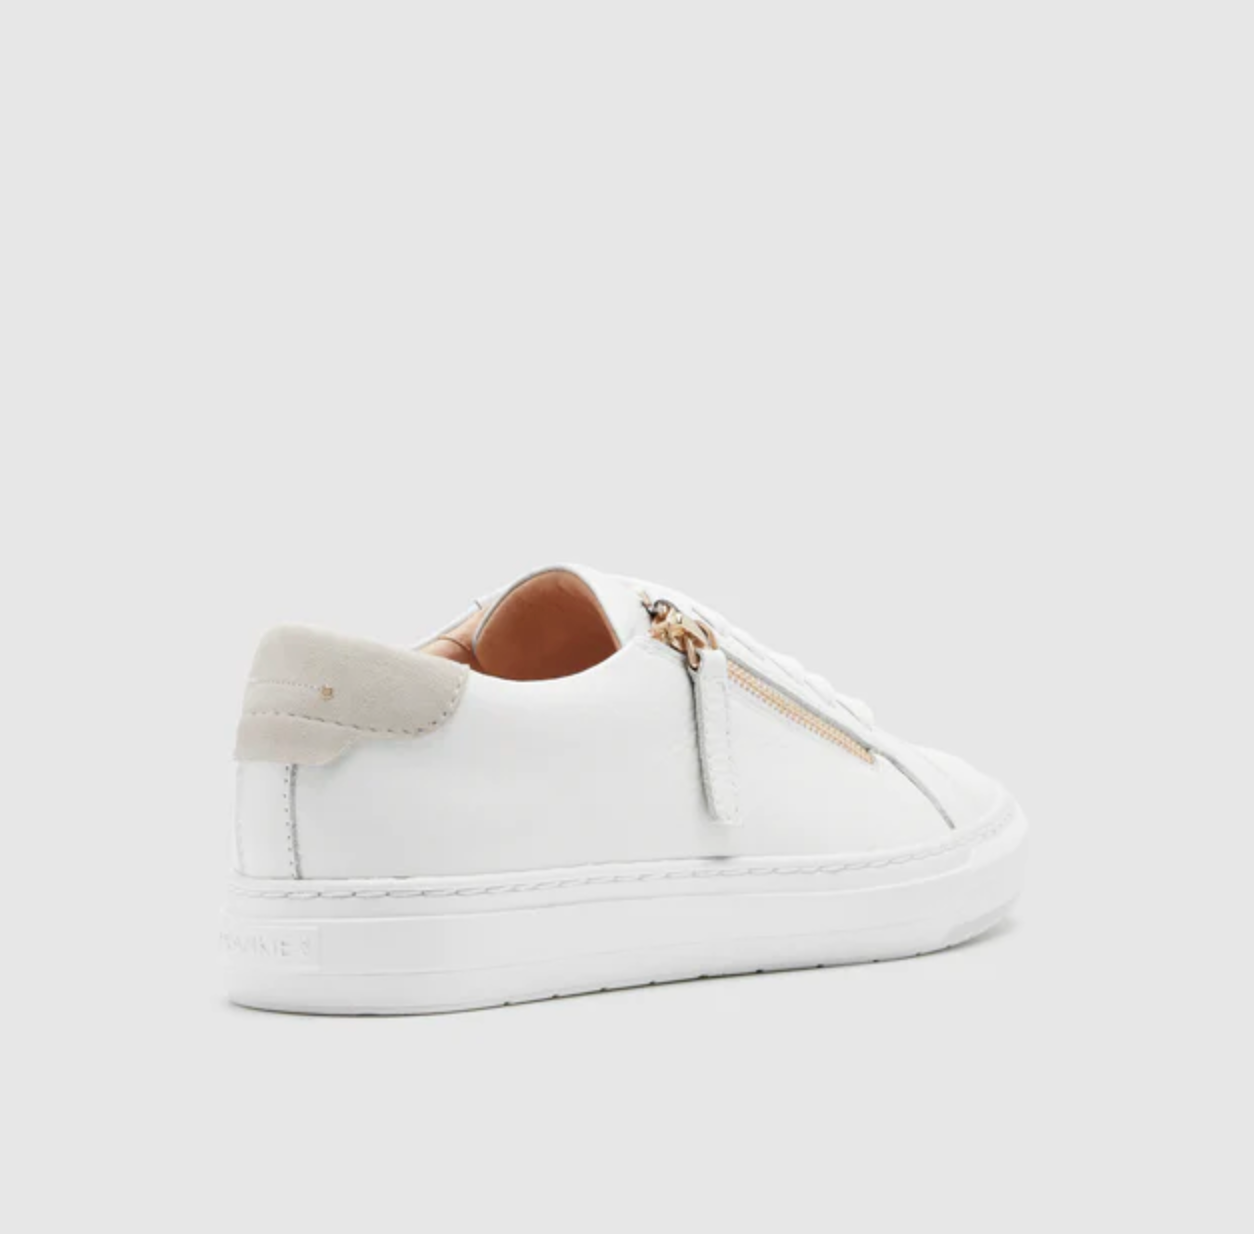 FRANKIE4 BILLIE WHITE TUMBLED - Women sneakers - Collective Shoes 